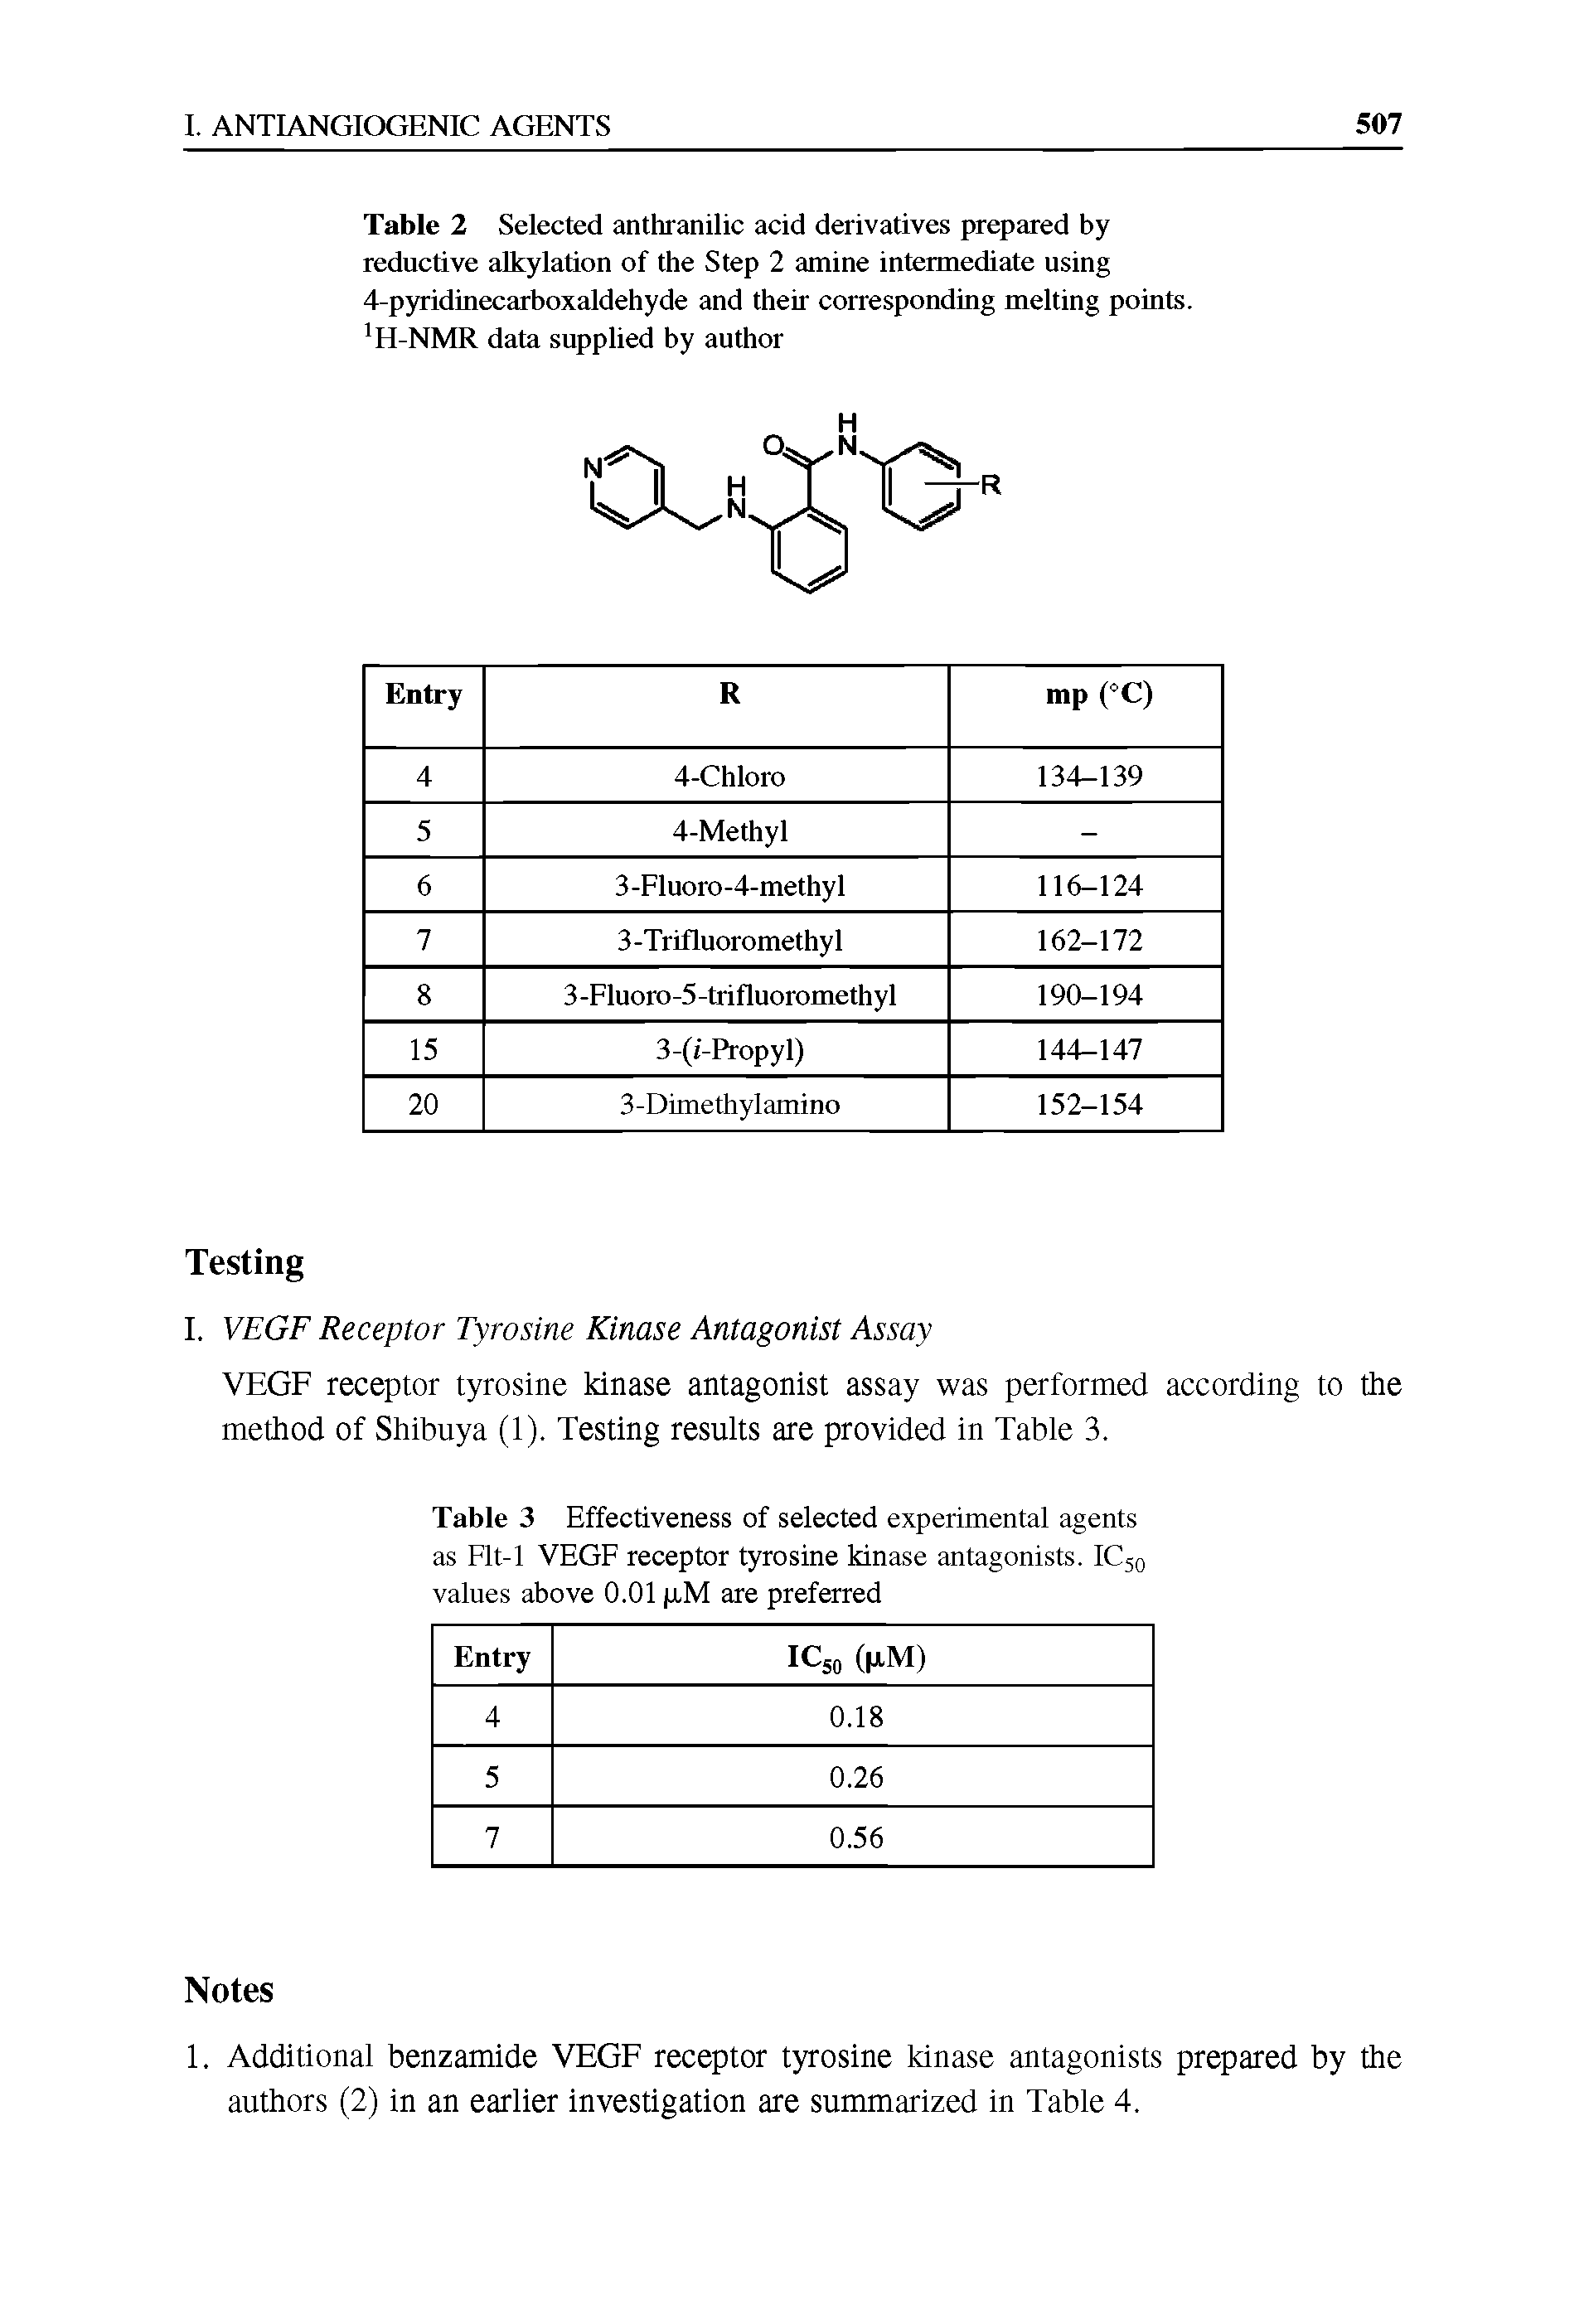 Table 2 Selected anthranilic acid derivatives prepared by reductive alkylation of the Step 2 amine intermediate using 4-pyridinecarboxaldehyde and their corresponding melting points. 111-NMR data supplied by author...